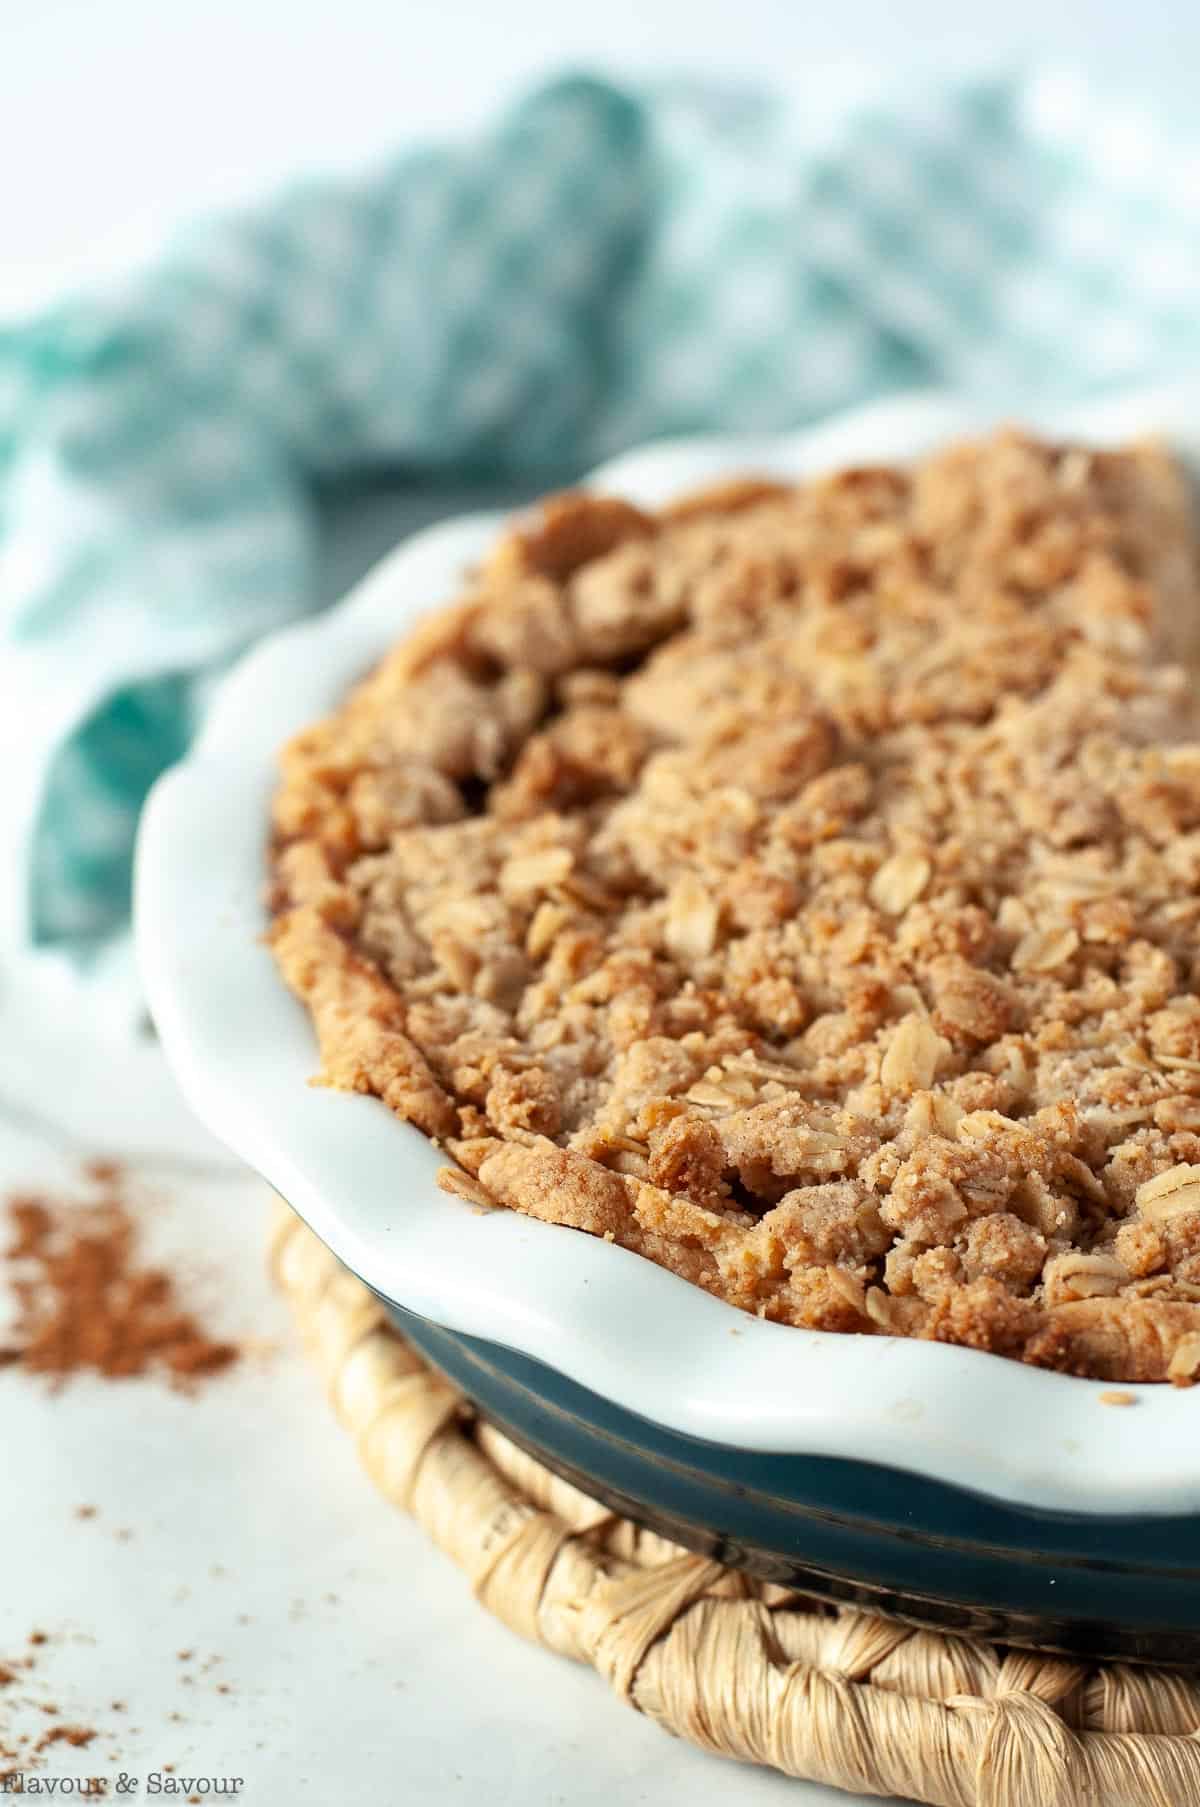 Baked Dutch Apple Pie with Almond Flour Crust and Crumble topping